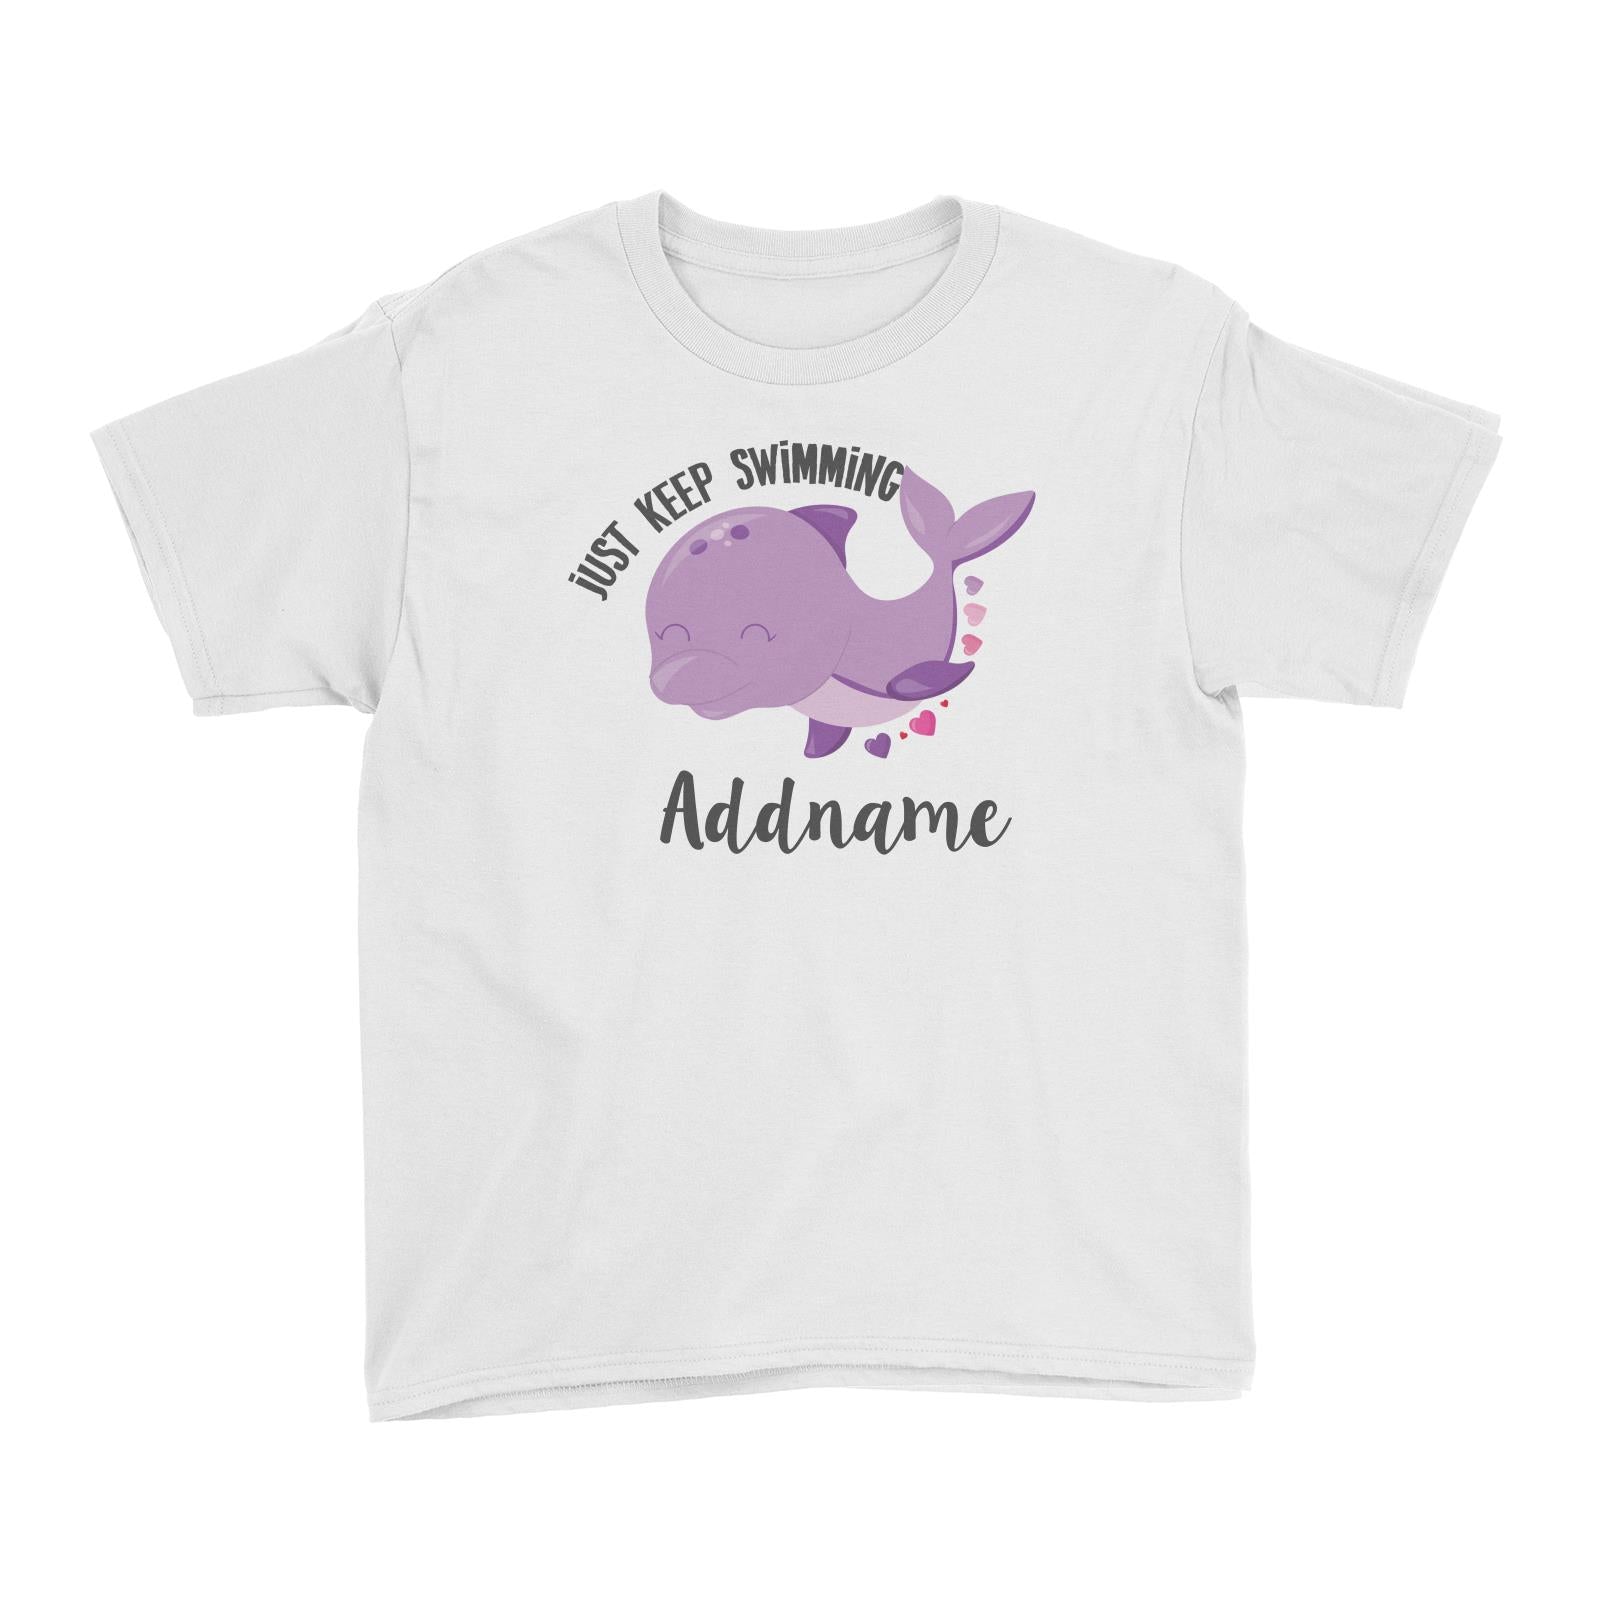 Cute Sea Animals Dolphin Just Keep Swimming Addname Kid's T-Shirt